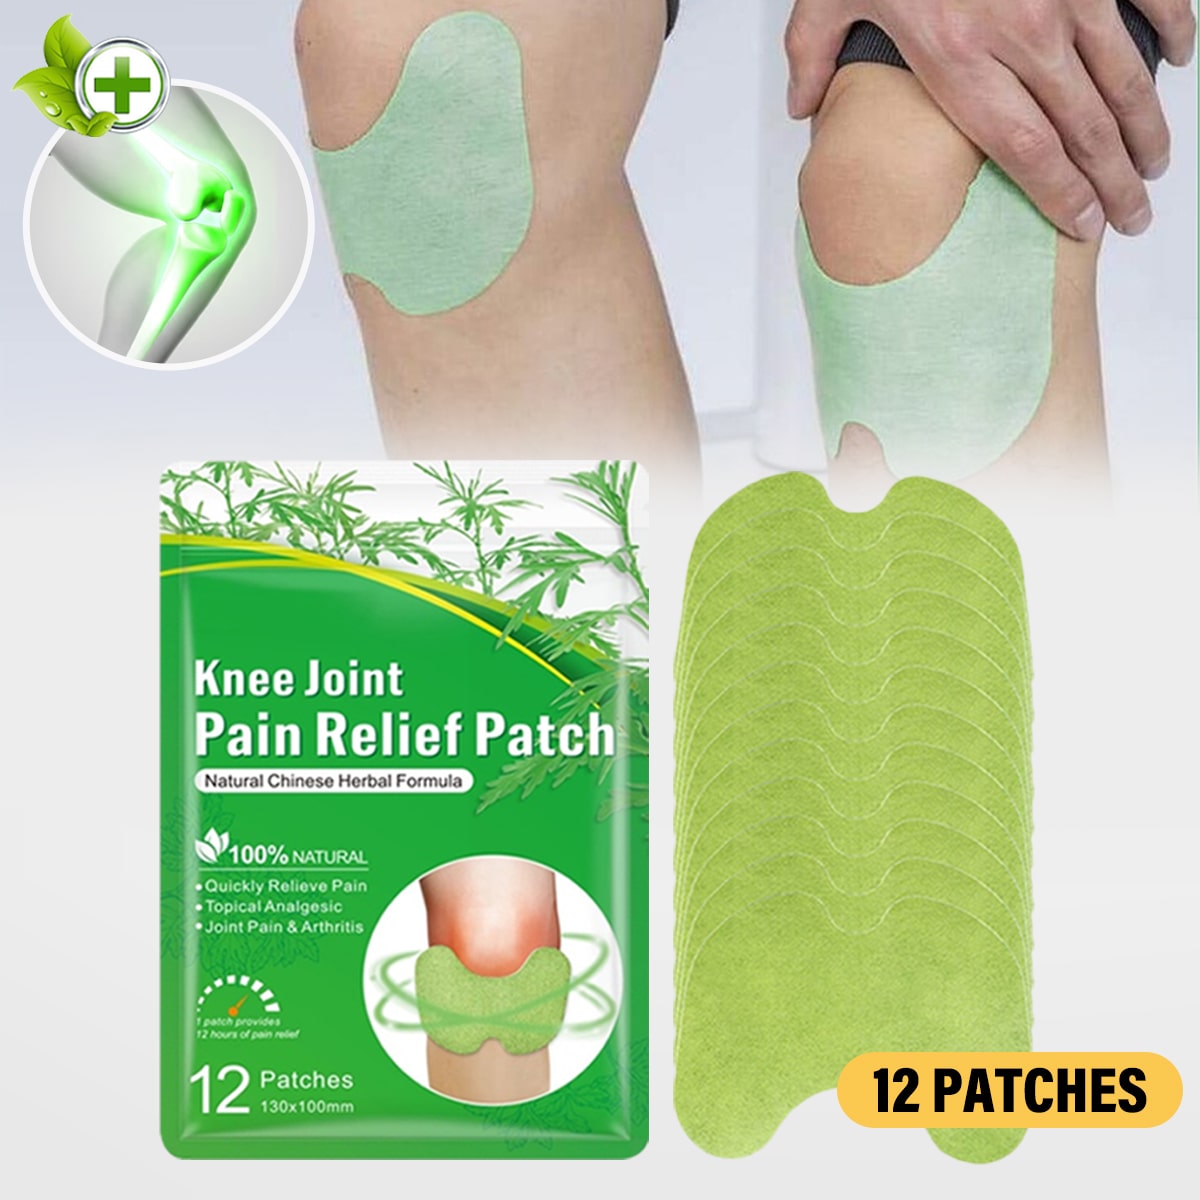 Prime DNA Menthol Cooling Joint Relief Patches for Knee, Ankle